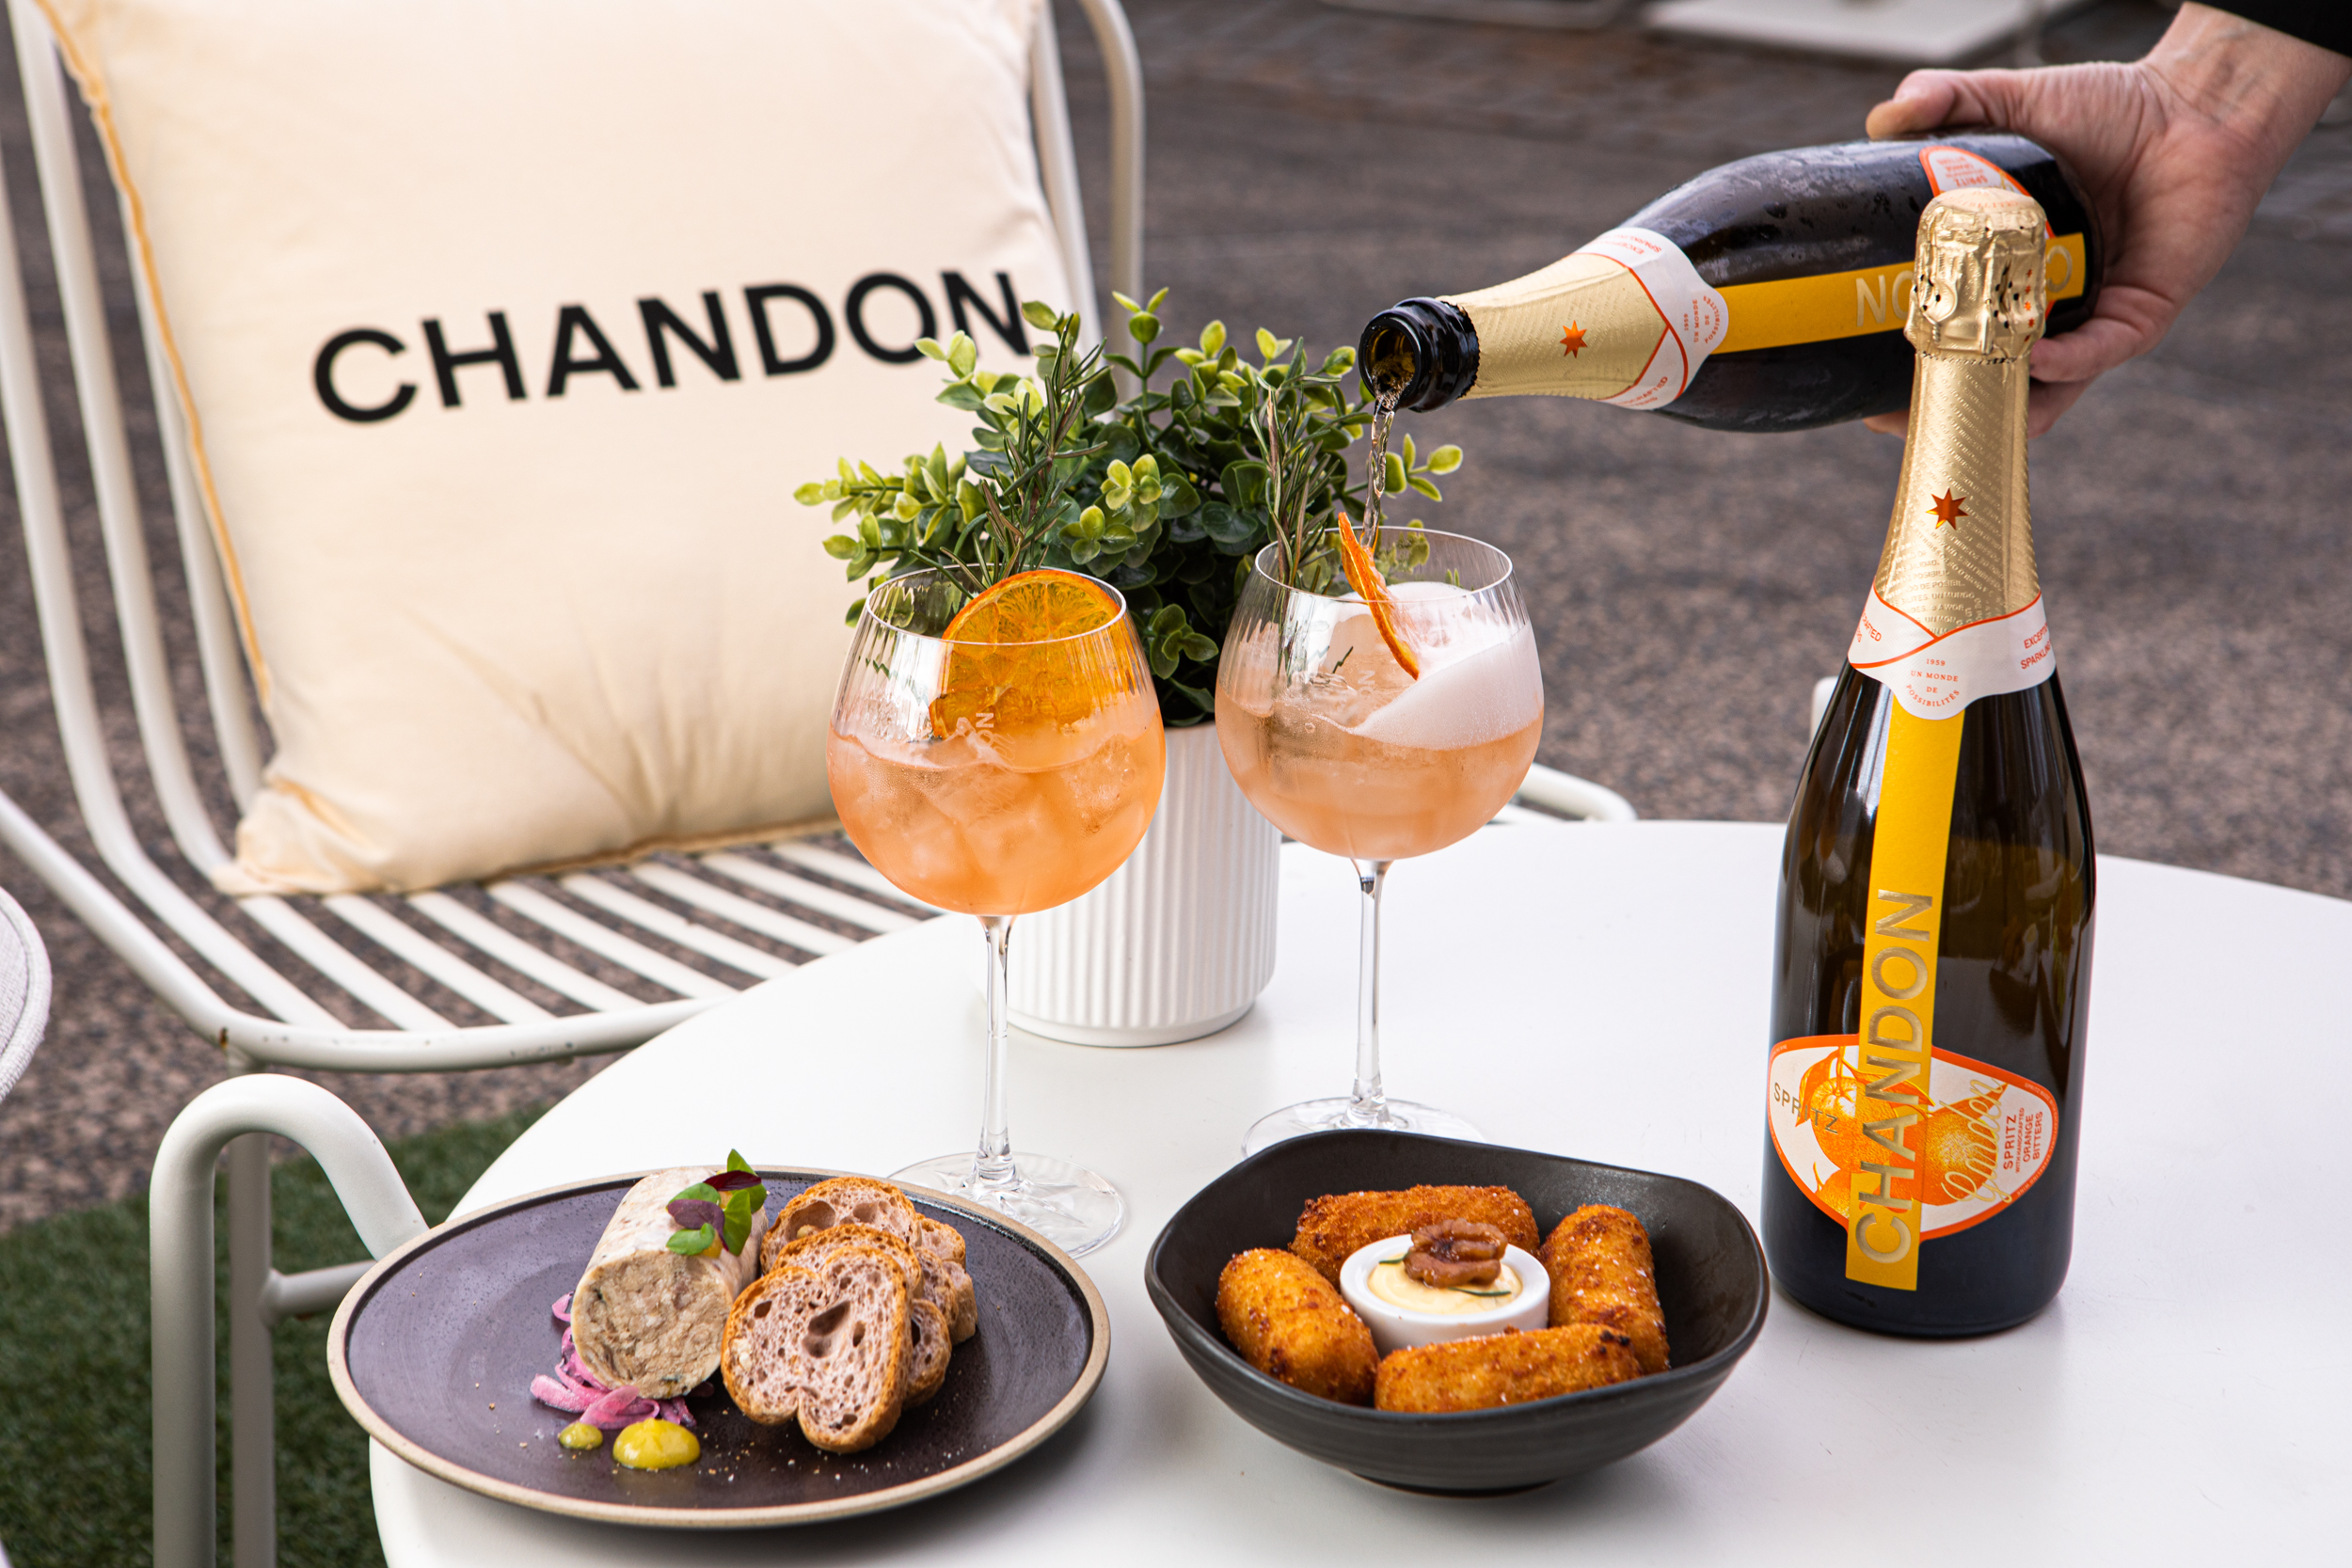 Chandon Garden Spritz Experience, Station Hollywood, Los Angeles